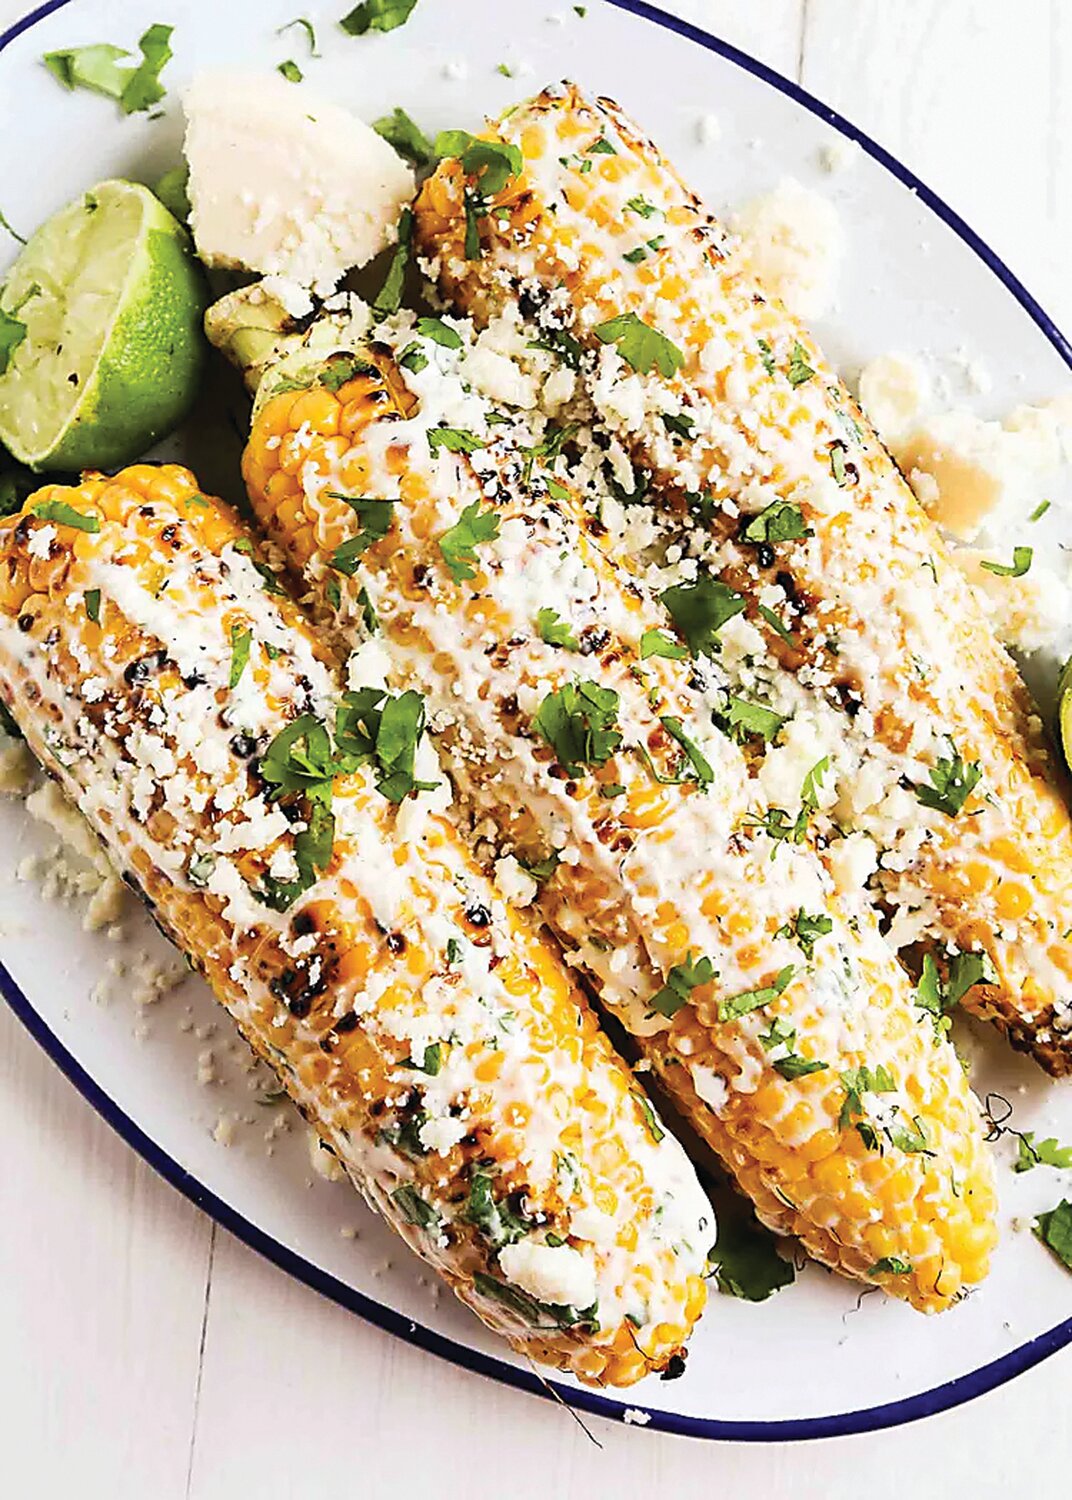 You can make Mexican street corn as spicy as you like; just adjust the ingredients to your personal taste.